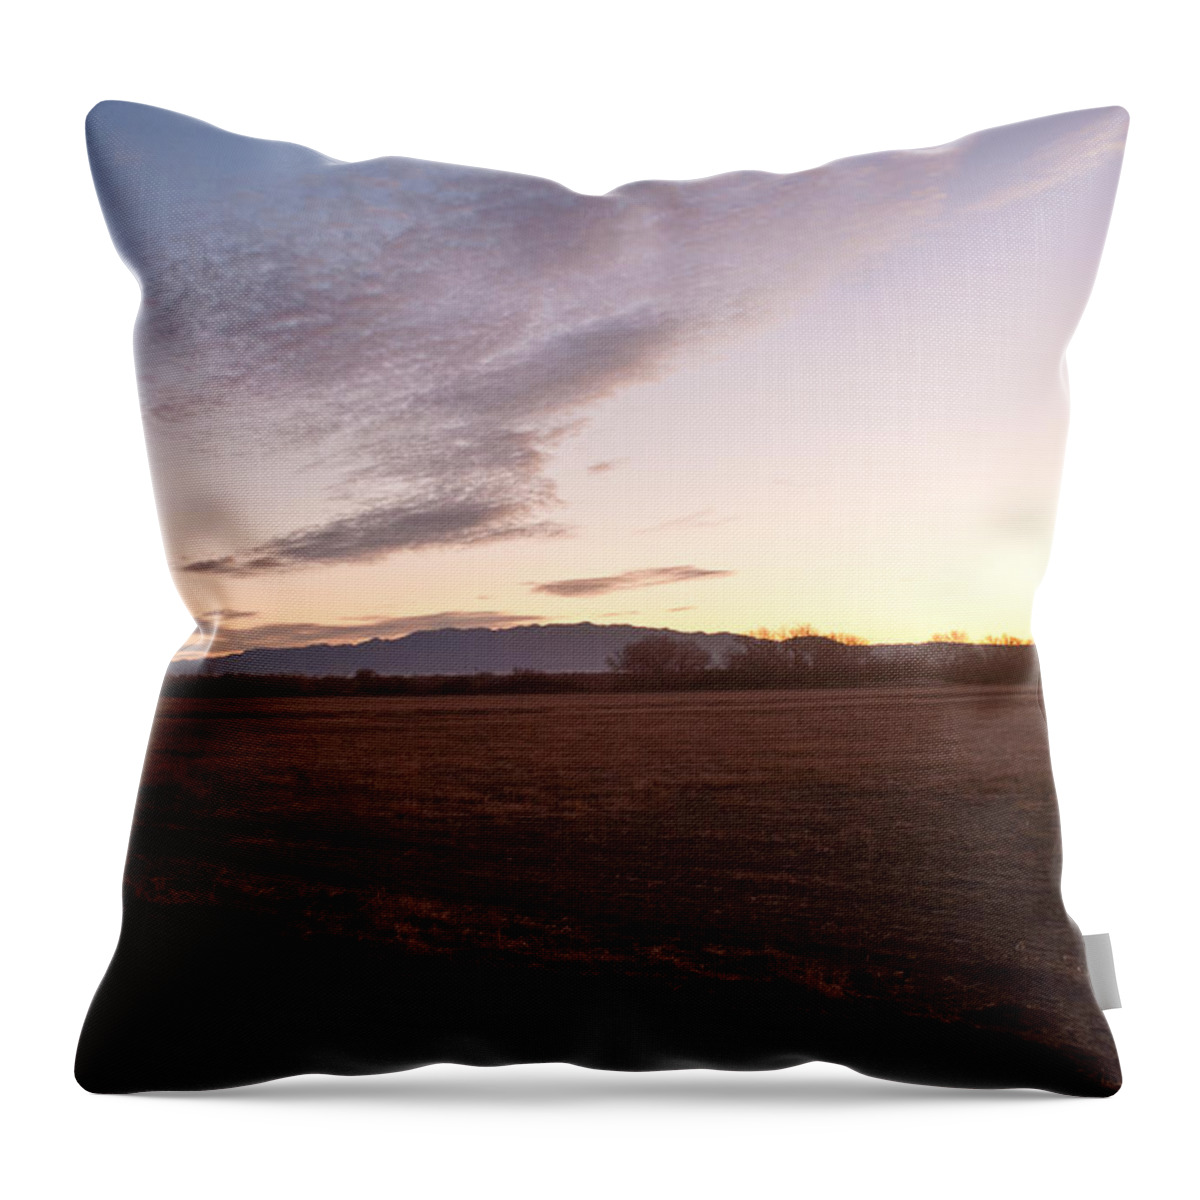  Throw Pillow featuring the photograph Sunrise in Refuge by James Gay